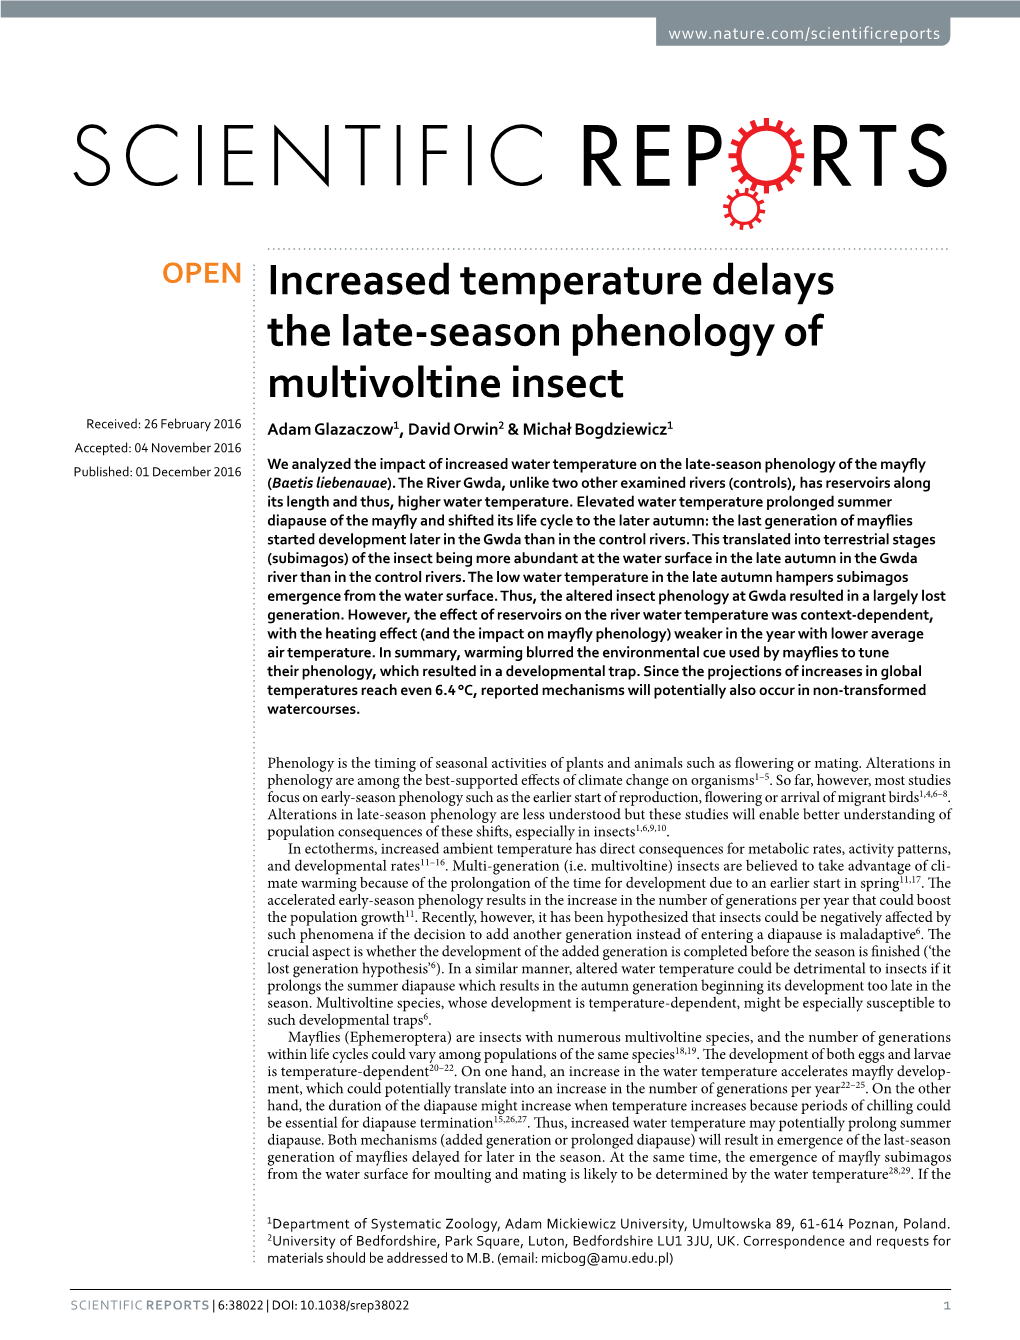 Increased Temperature Delays the Late-Season Phenology Of